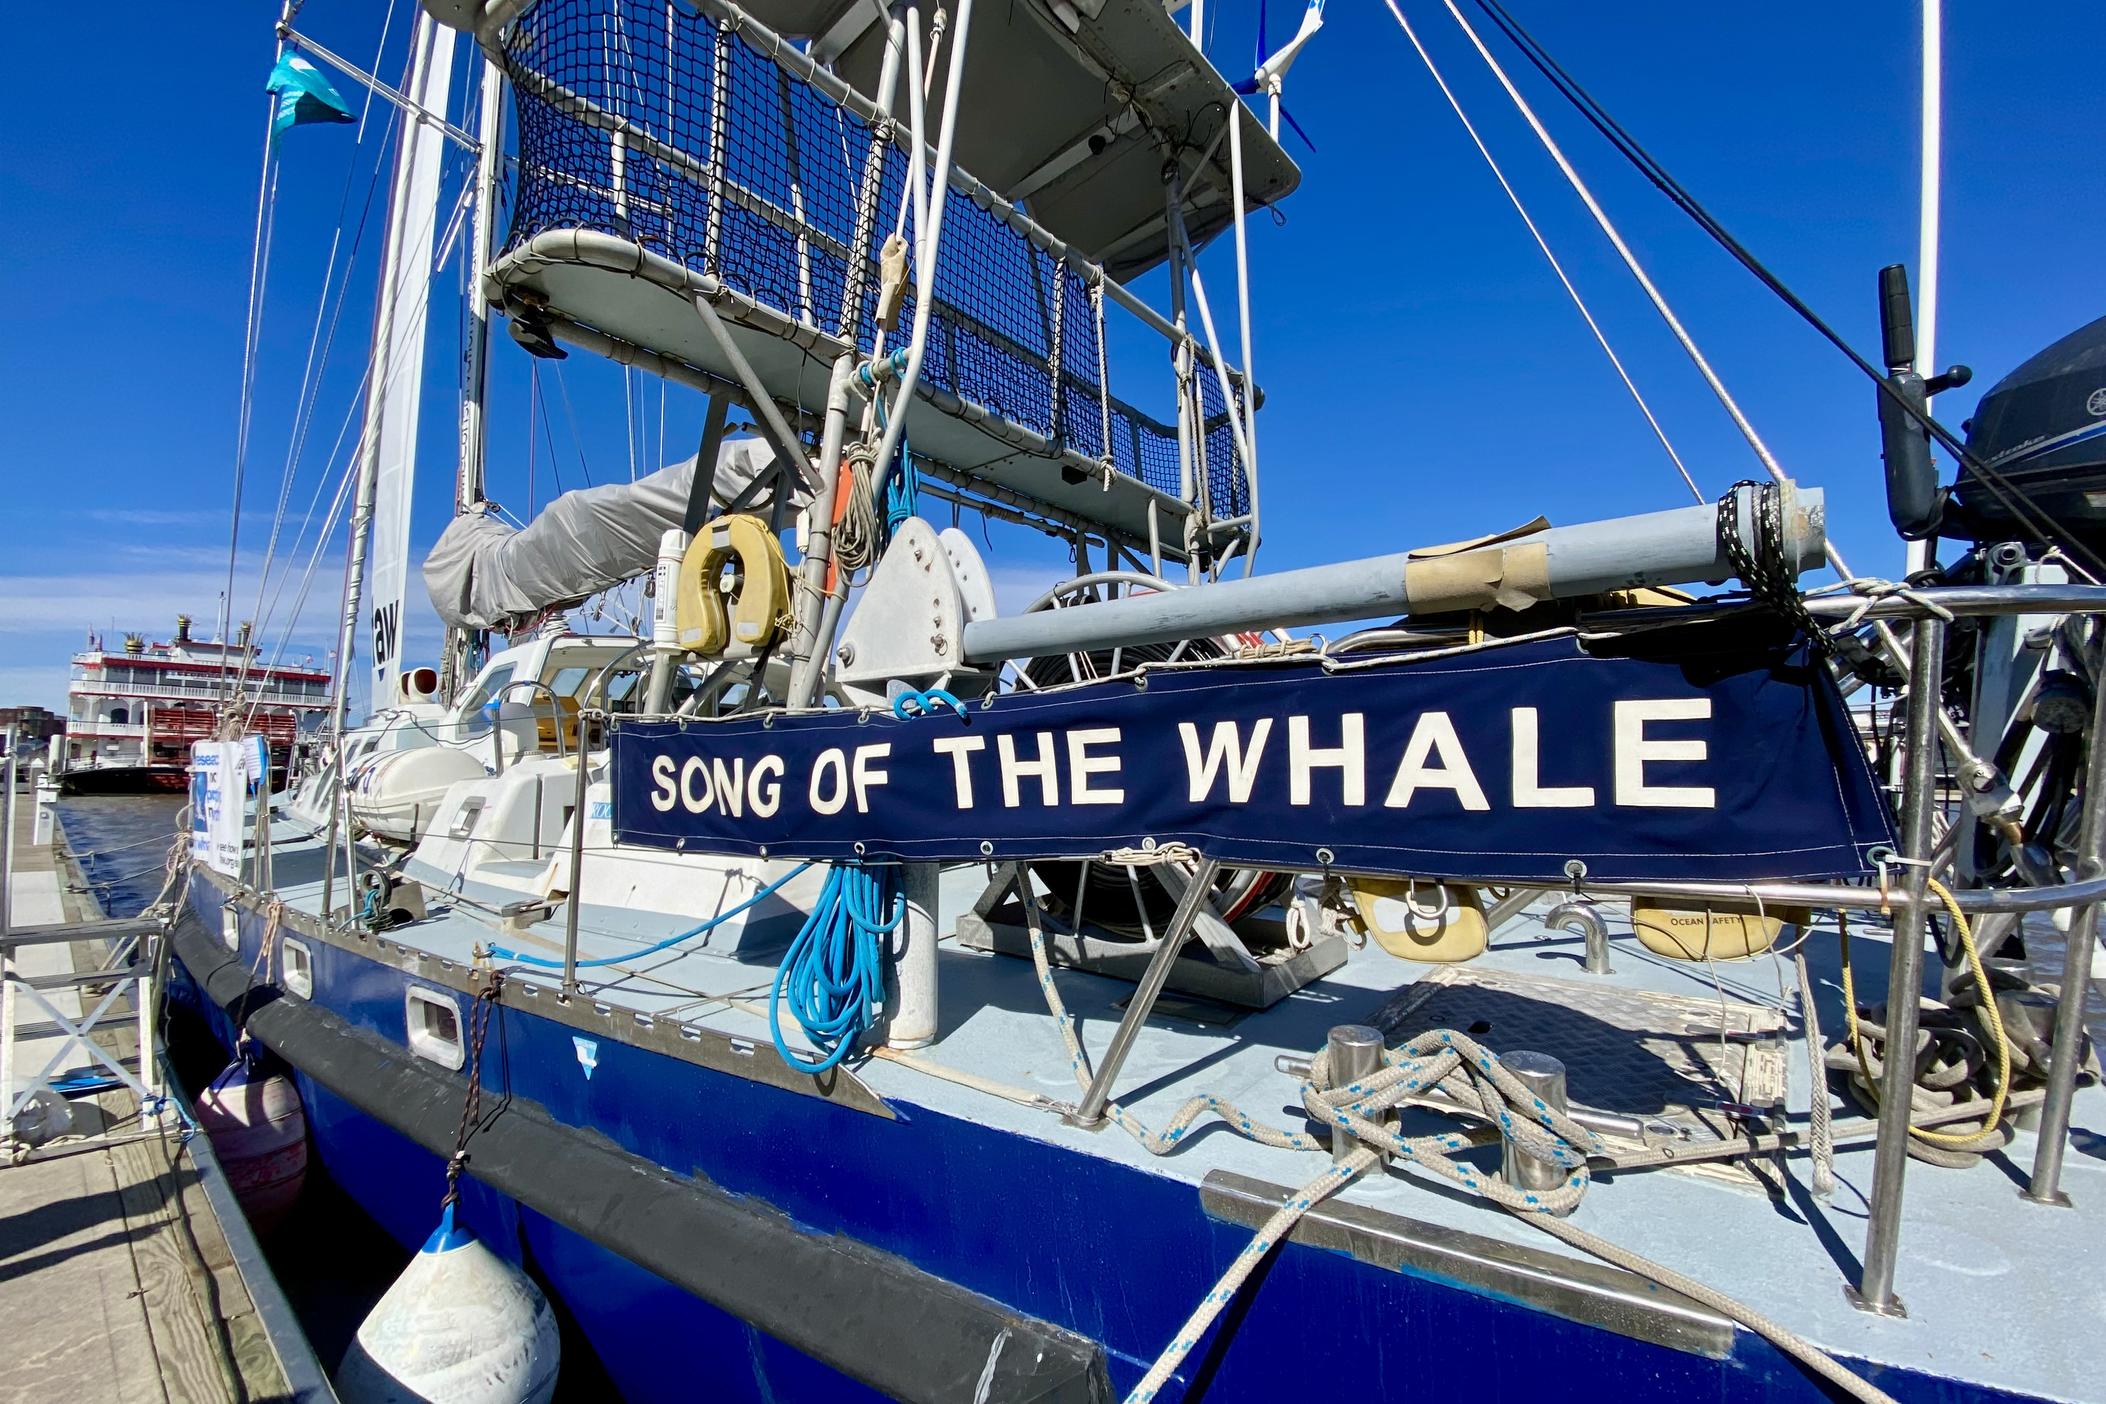 The research vessel Song of the Whale was docked along the Savannah River on Friday, Jan. 27, 2023.